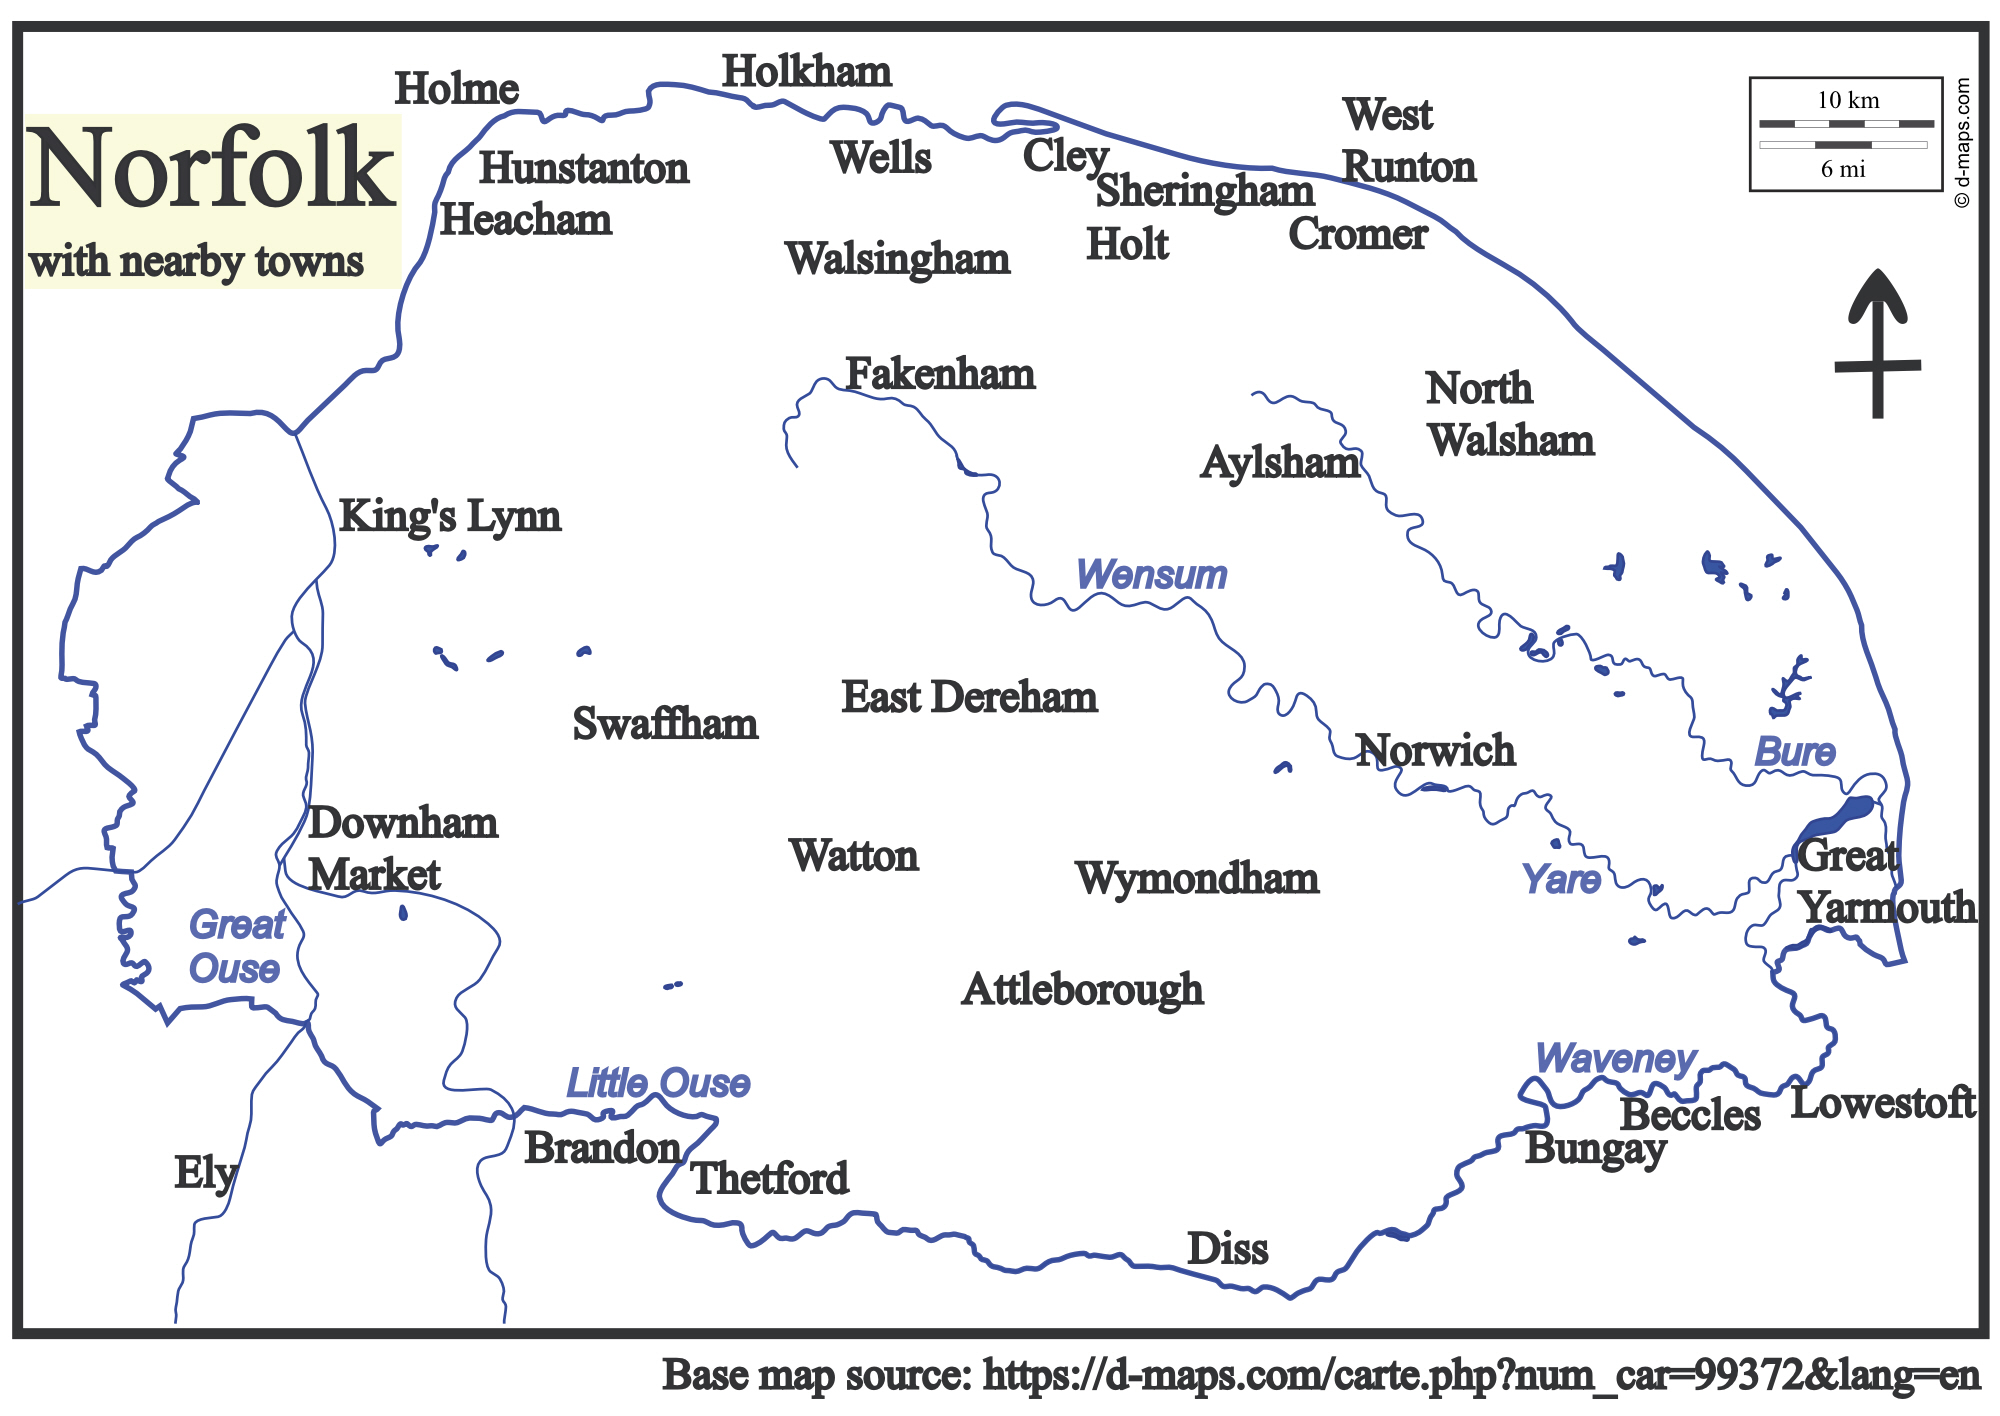 Map of Norfolk ahowing towns and rivers